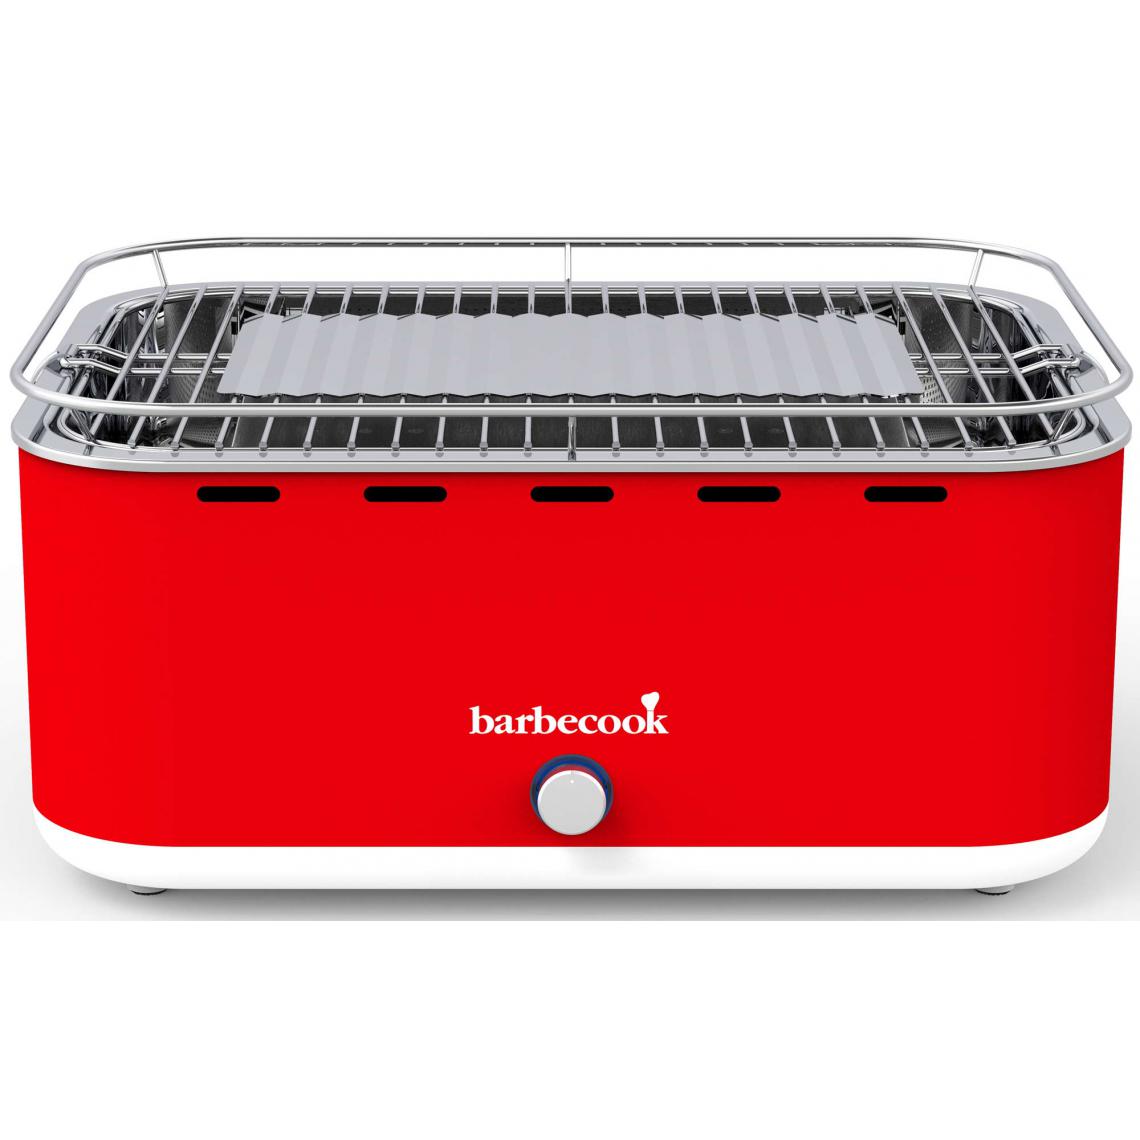 BARBECOOK - Barbecue BARBECOOK CARLOCHILIPEPPER - Barbecues électriques